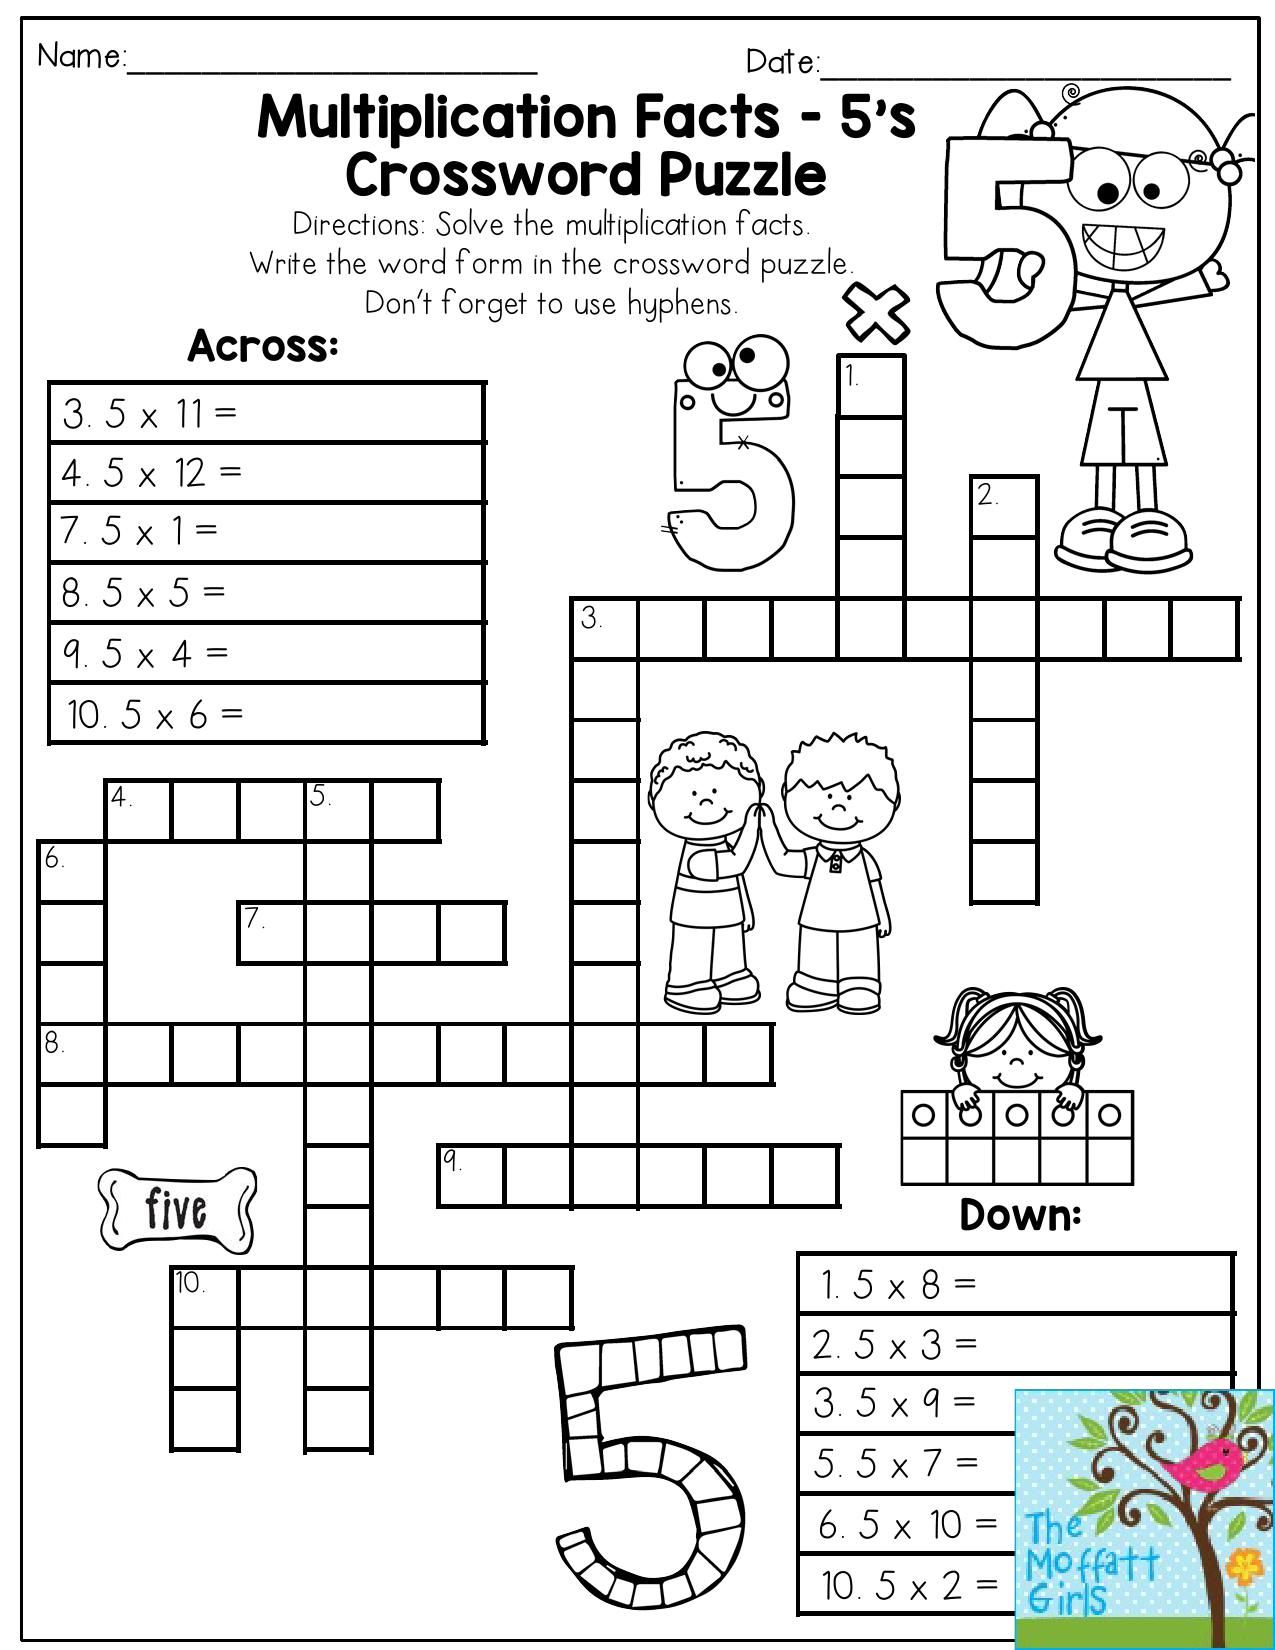 Free Printable Multiplication Crossword Puzzles